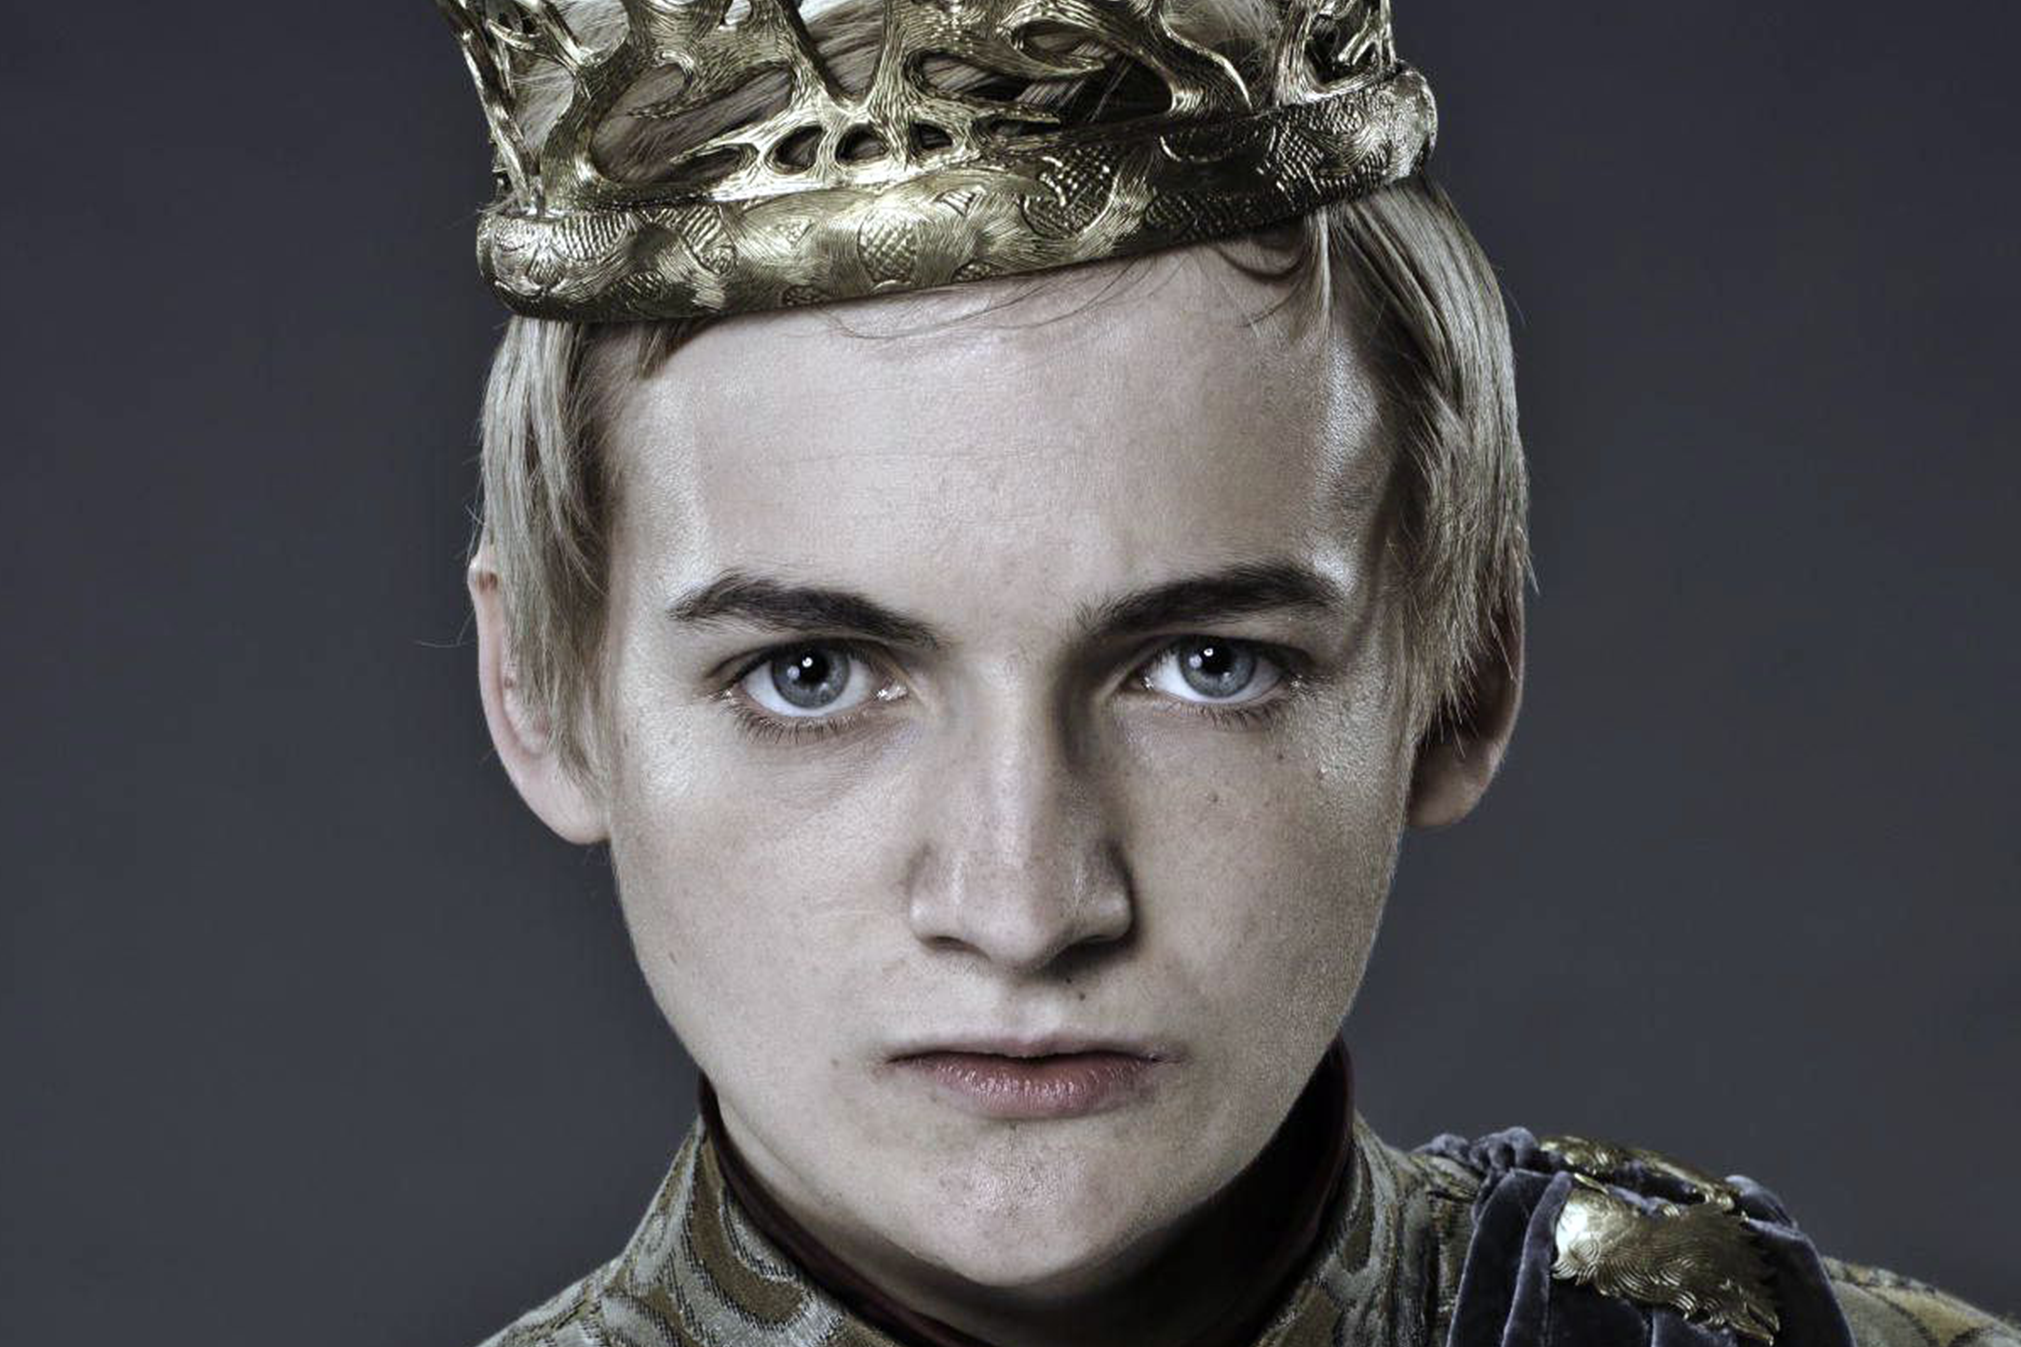 A nice young boy: Jack Gleeson as King Joffrey in HBO's Game of Thrones